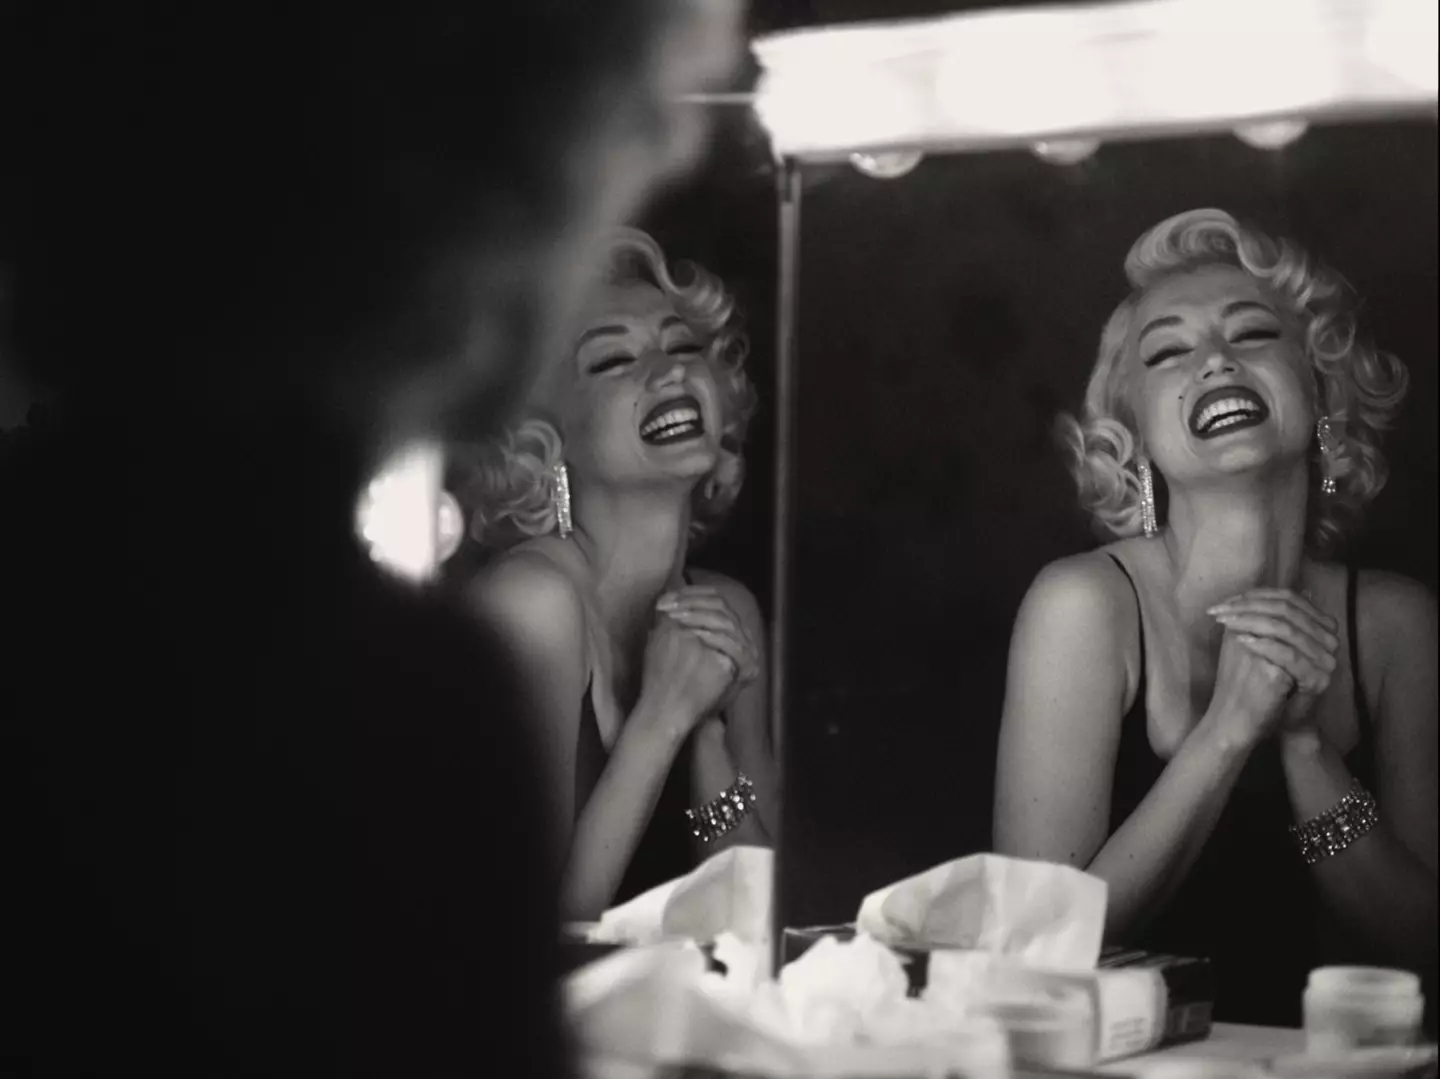 The film is based on a fictitious telling of Marilyn's life.